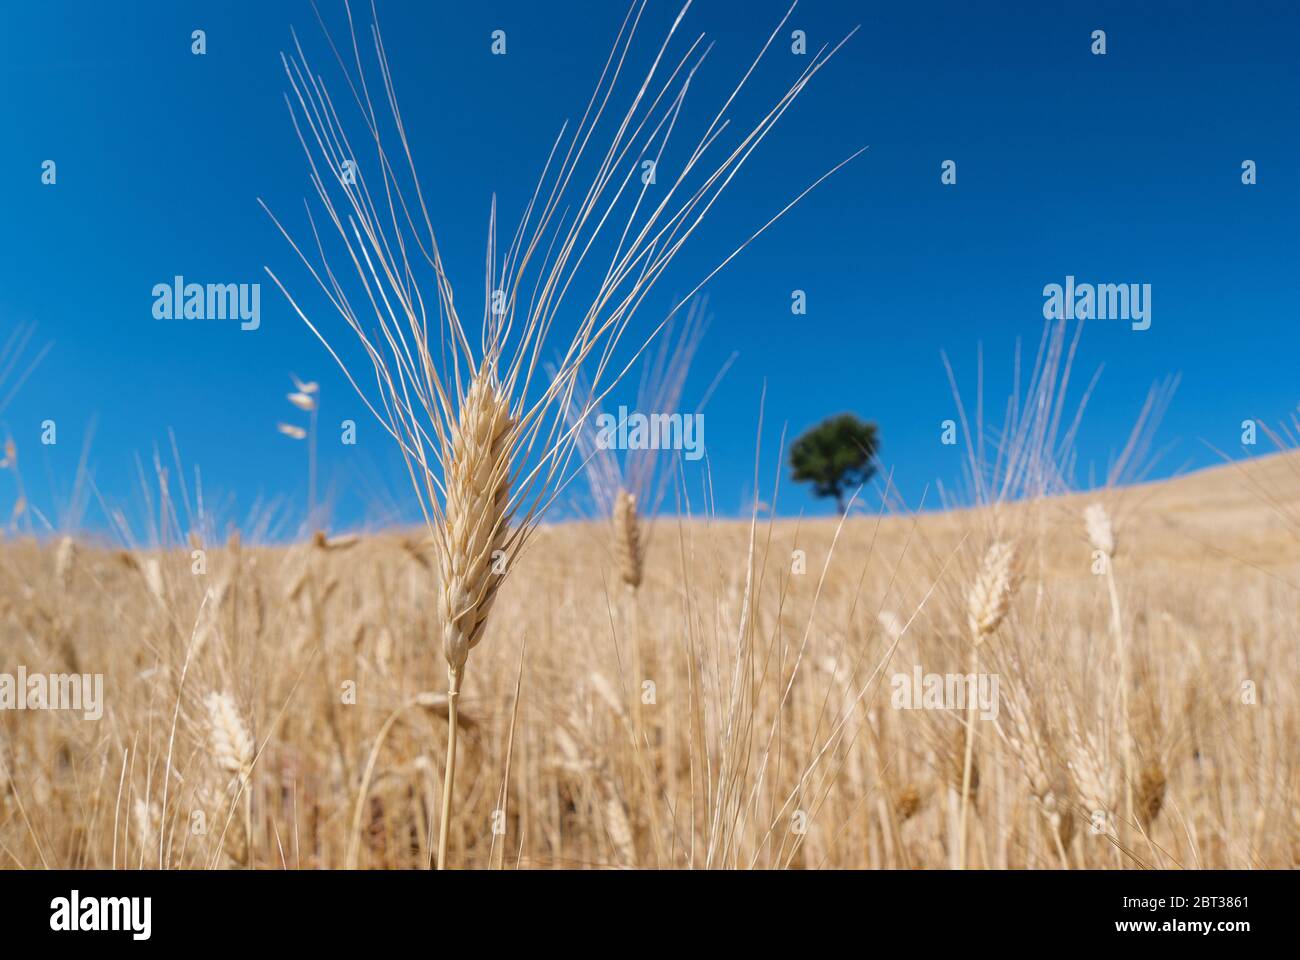 landscape Sicily countryside with ear of wheat, on background at blurred solitary tree at horizon against blue sky Stock Photo